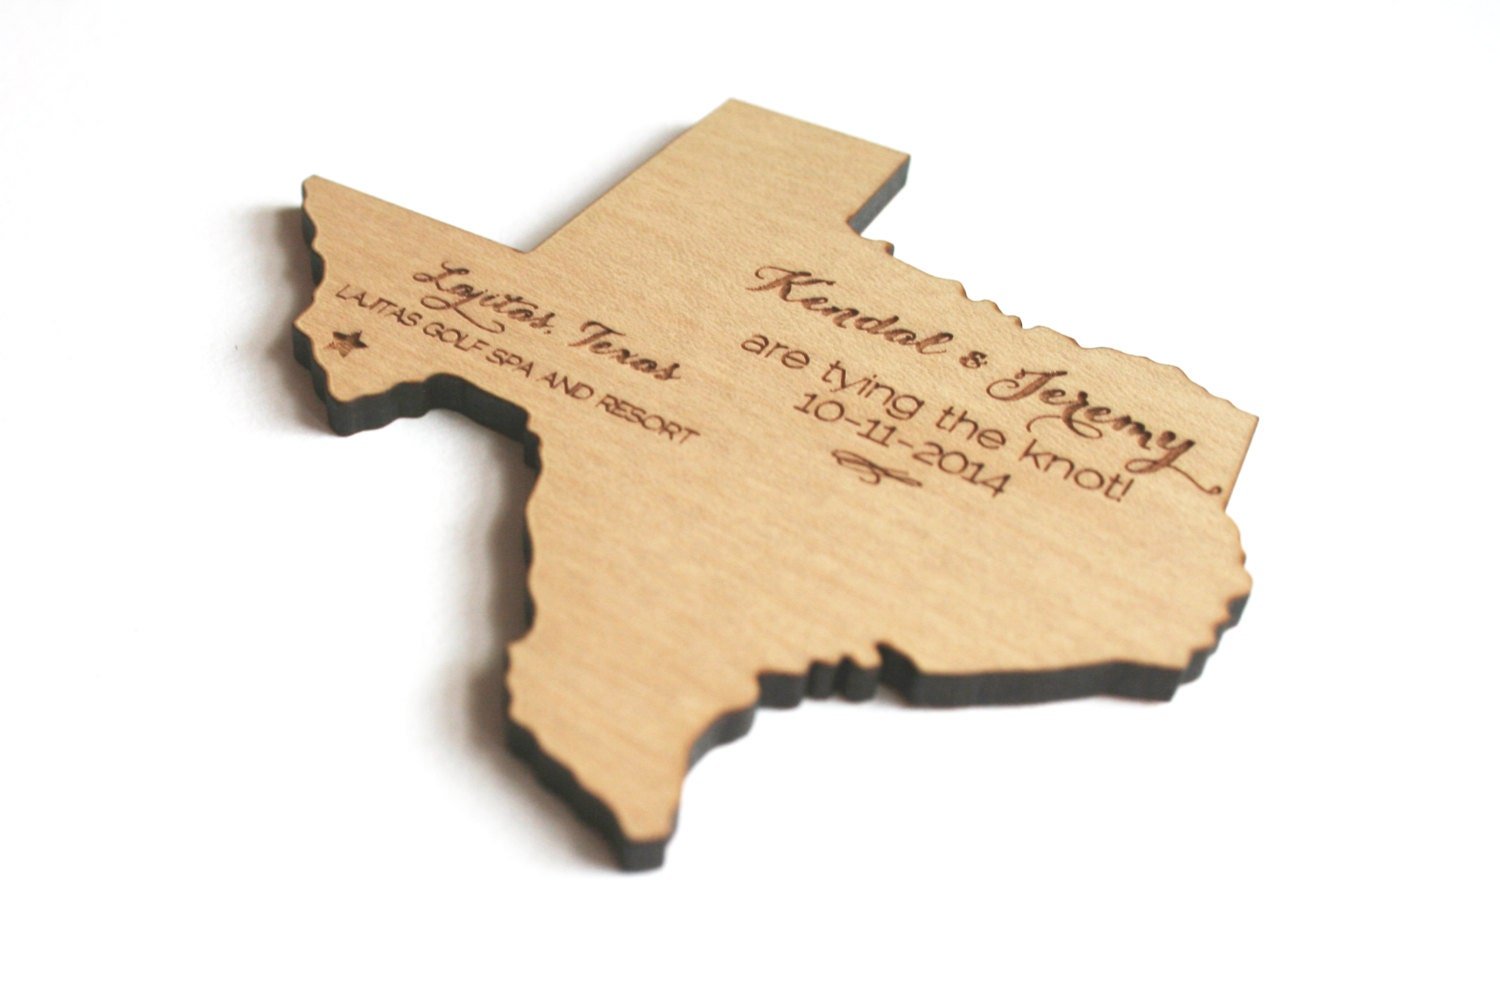 Wood Save the Date Magnets – Rooted & Built Design